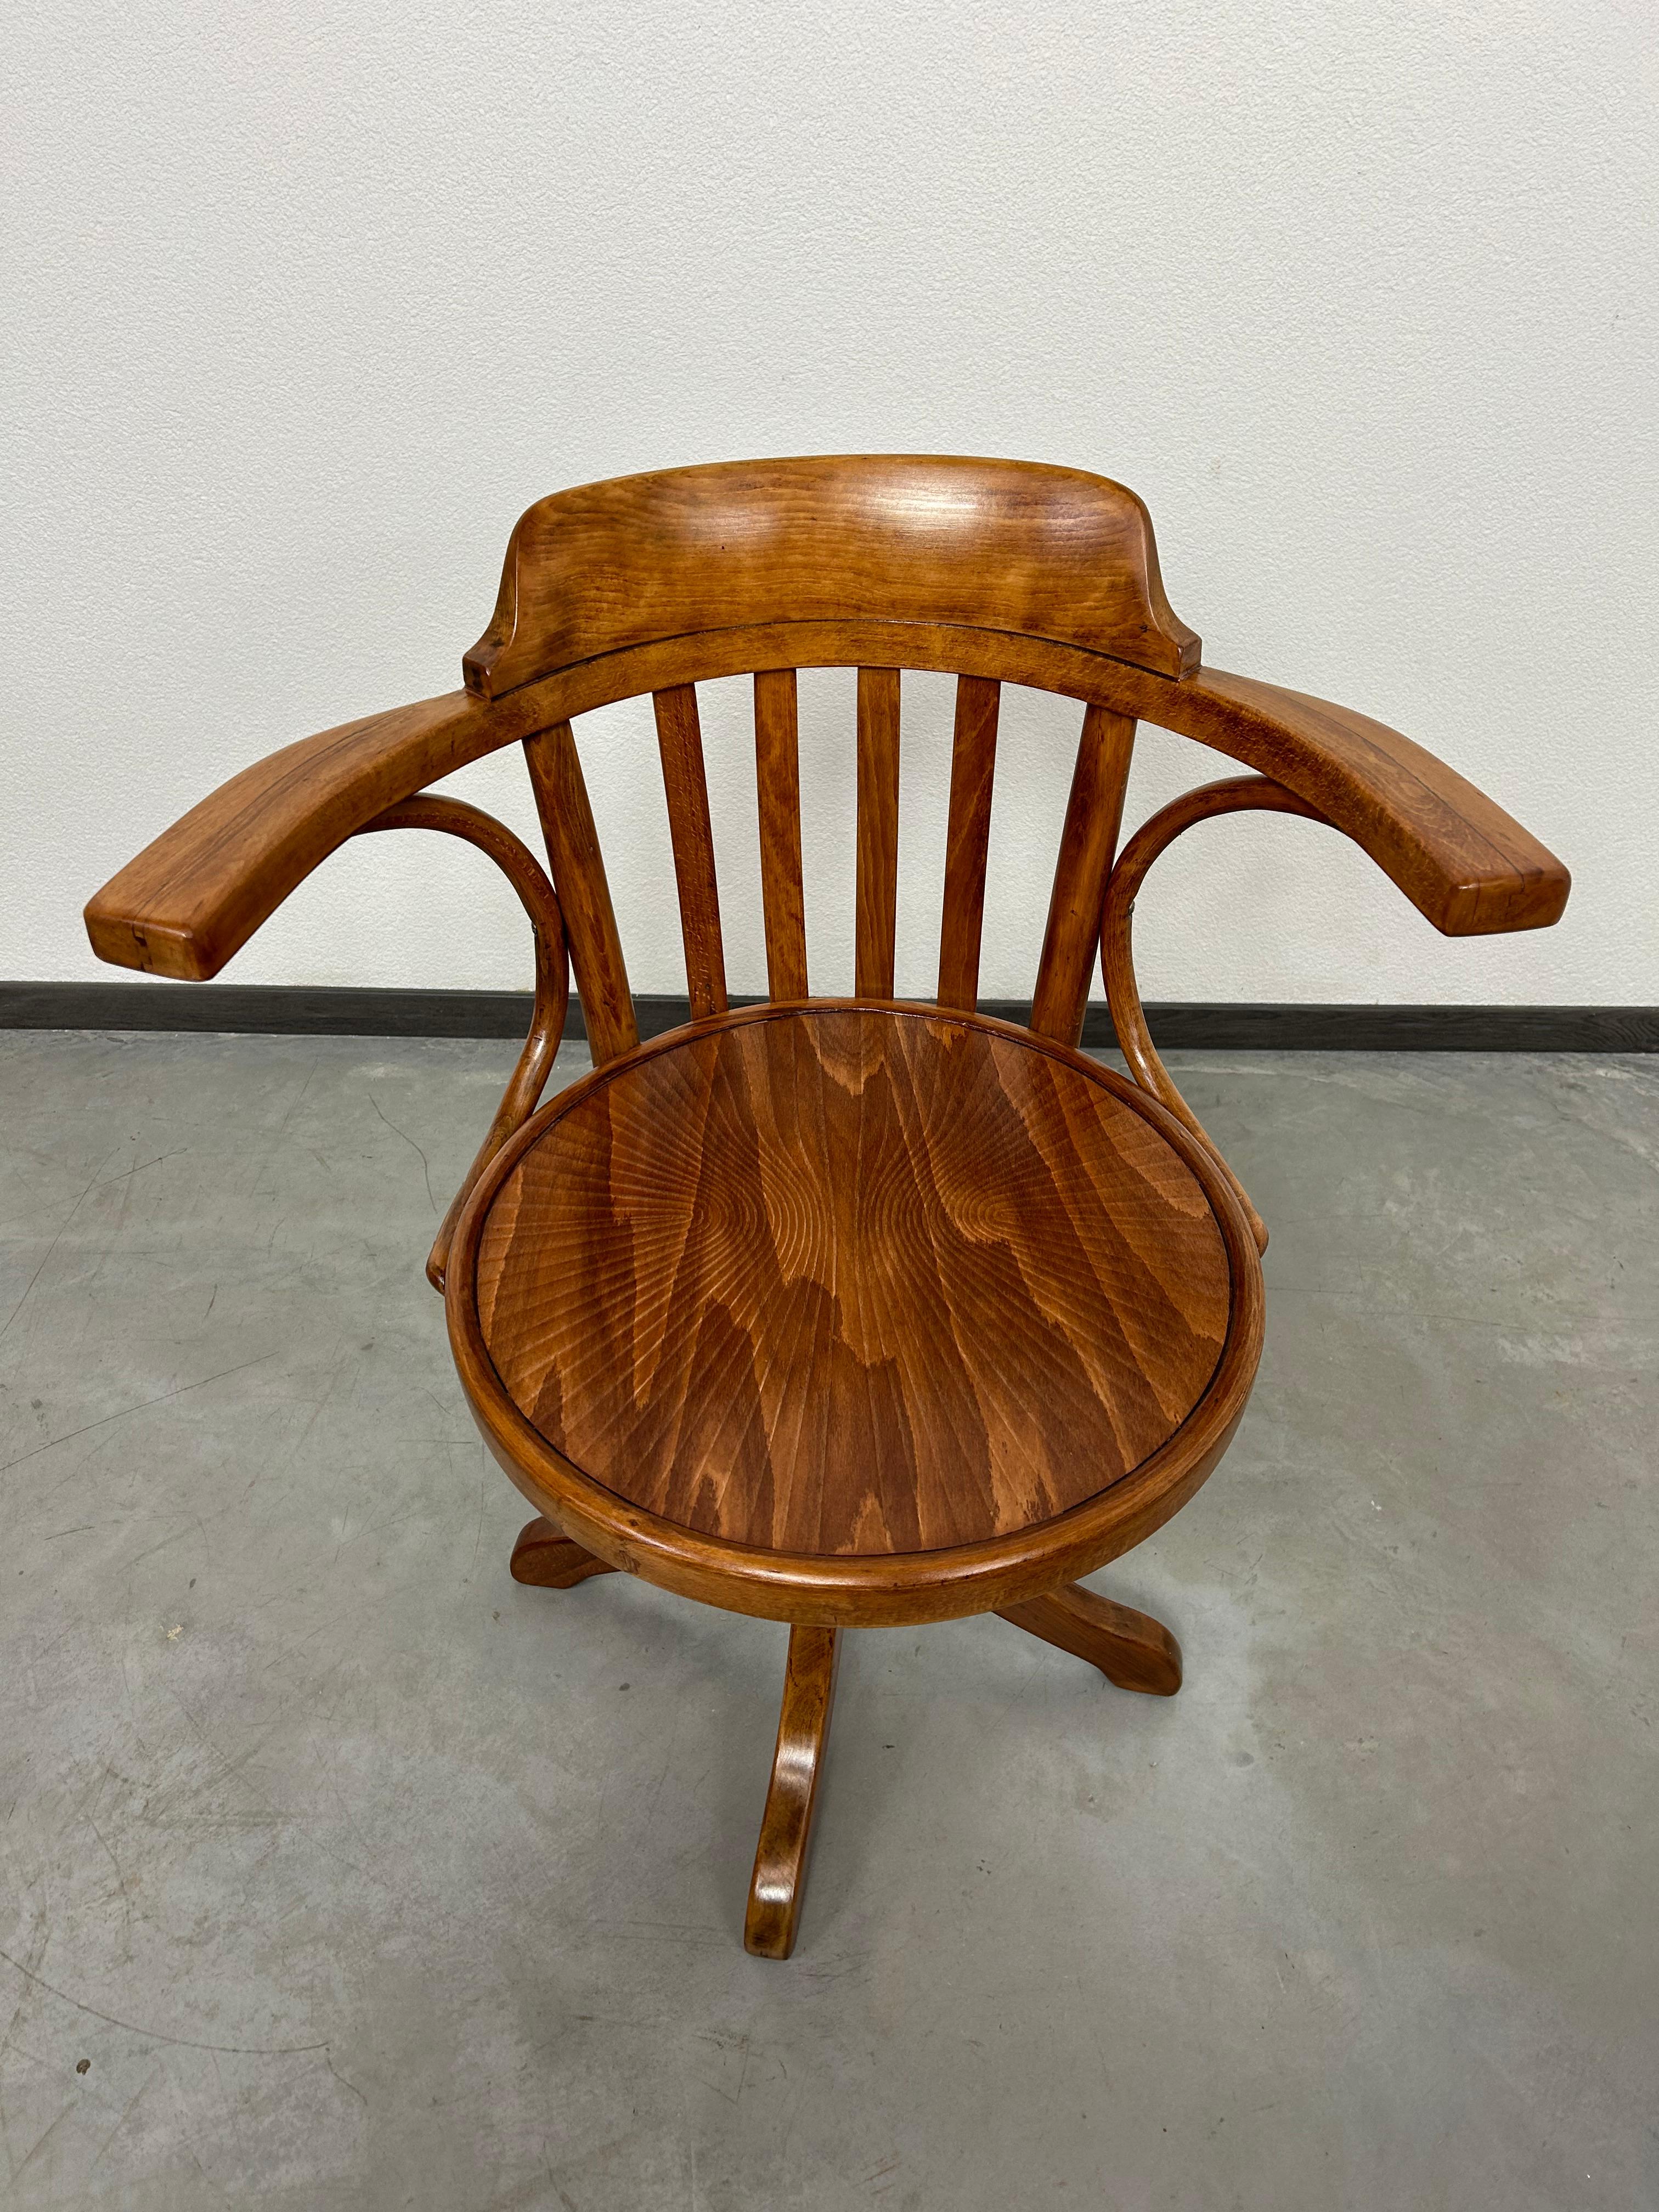 Bentwood swivel chair B663 by Thonet. Professionally stained and repolished.